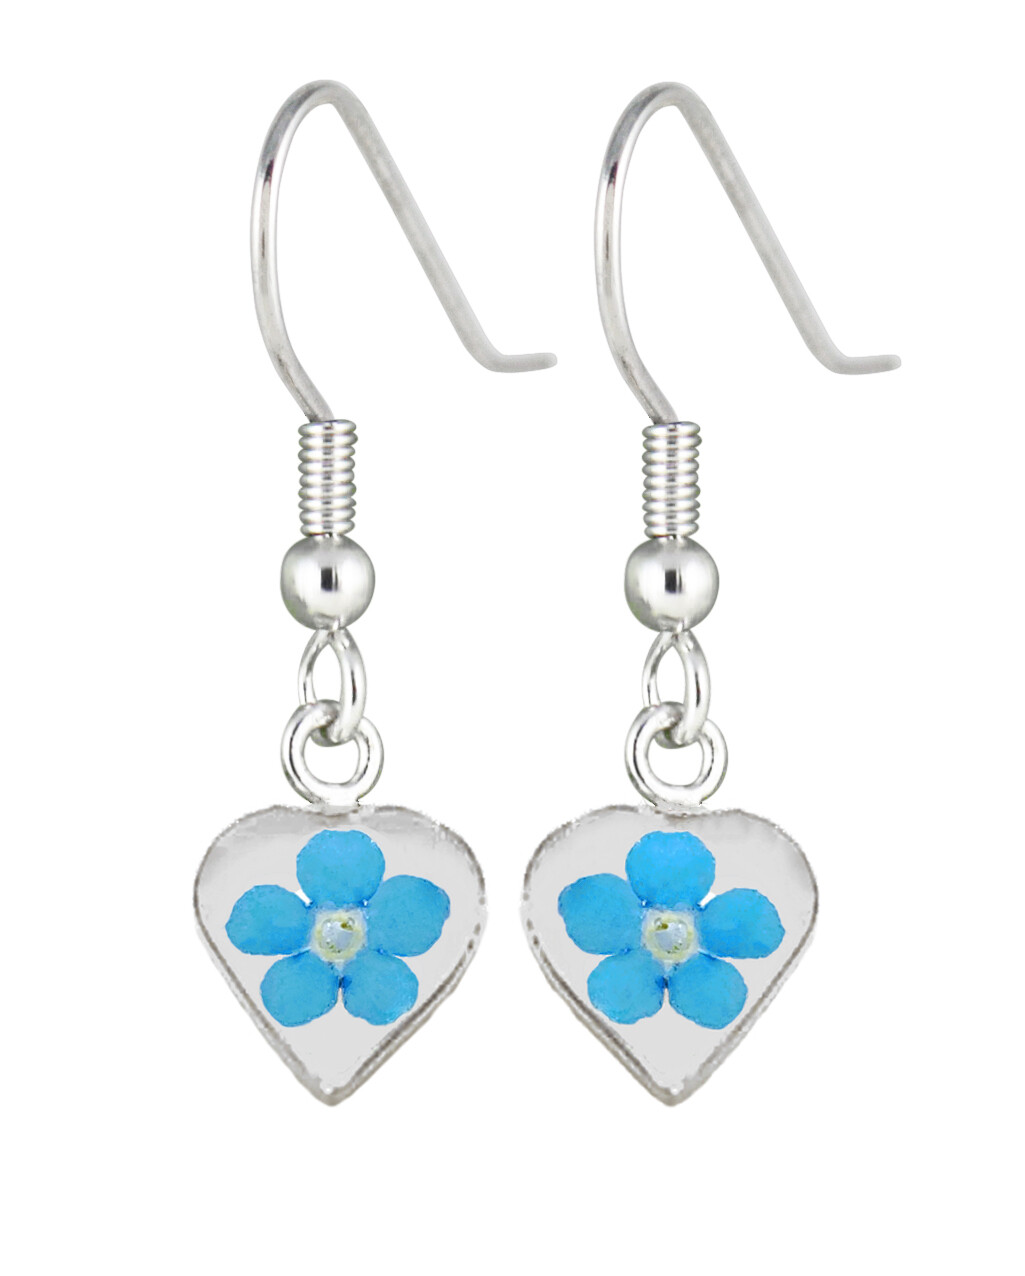 Real Forget-Me-Not, Small Heart Earrings, White Background